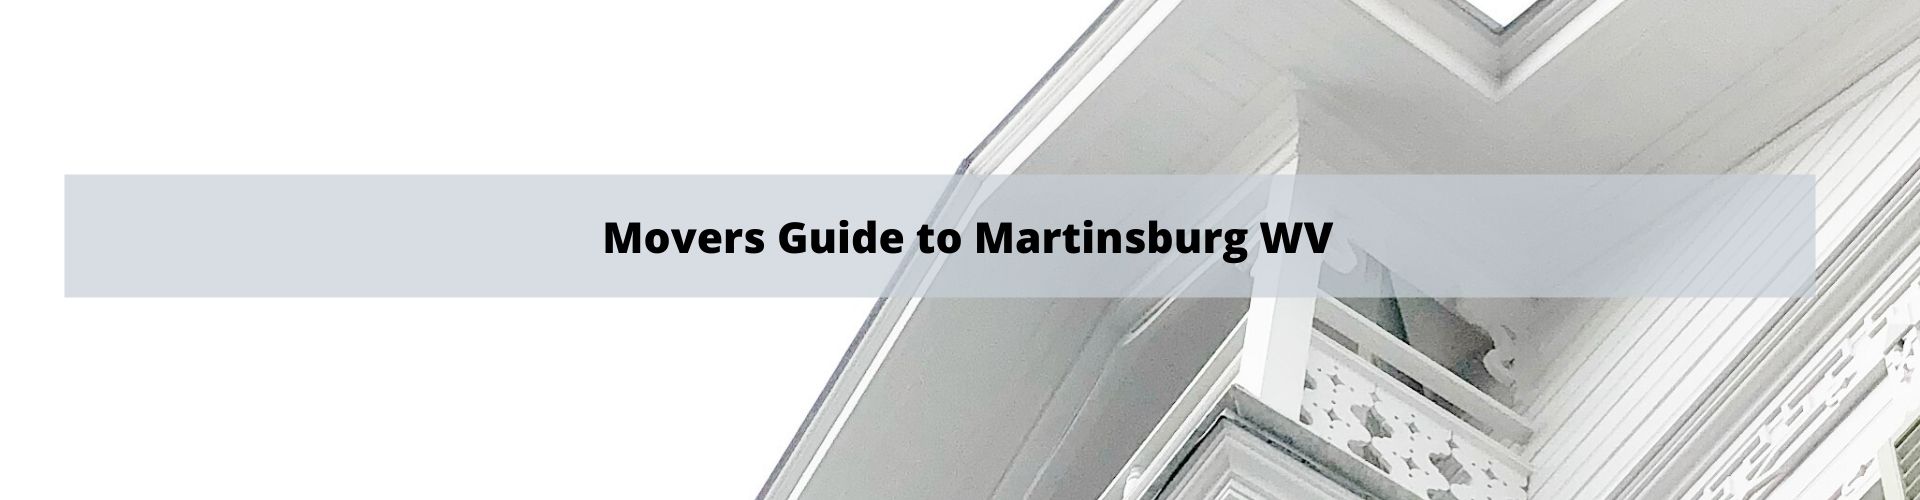 Mover's Guide to Martinsburg WV